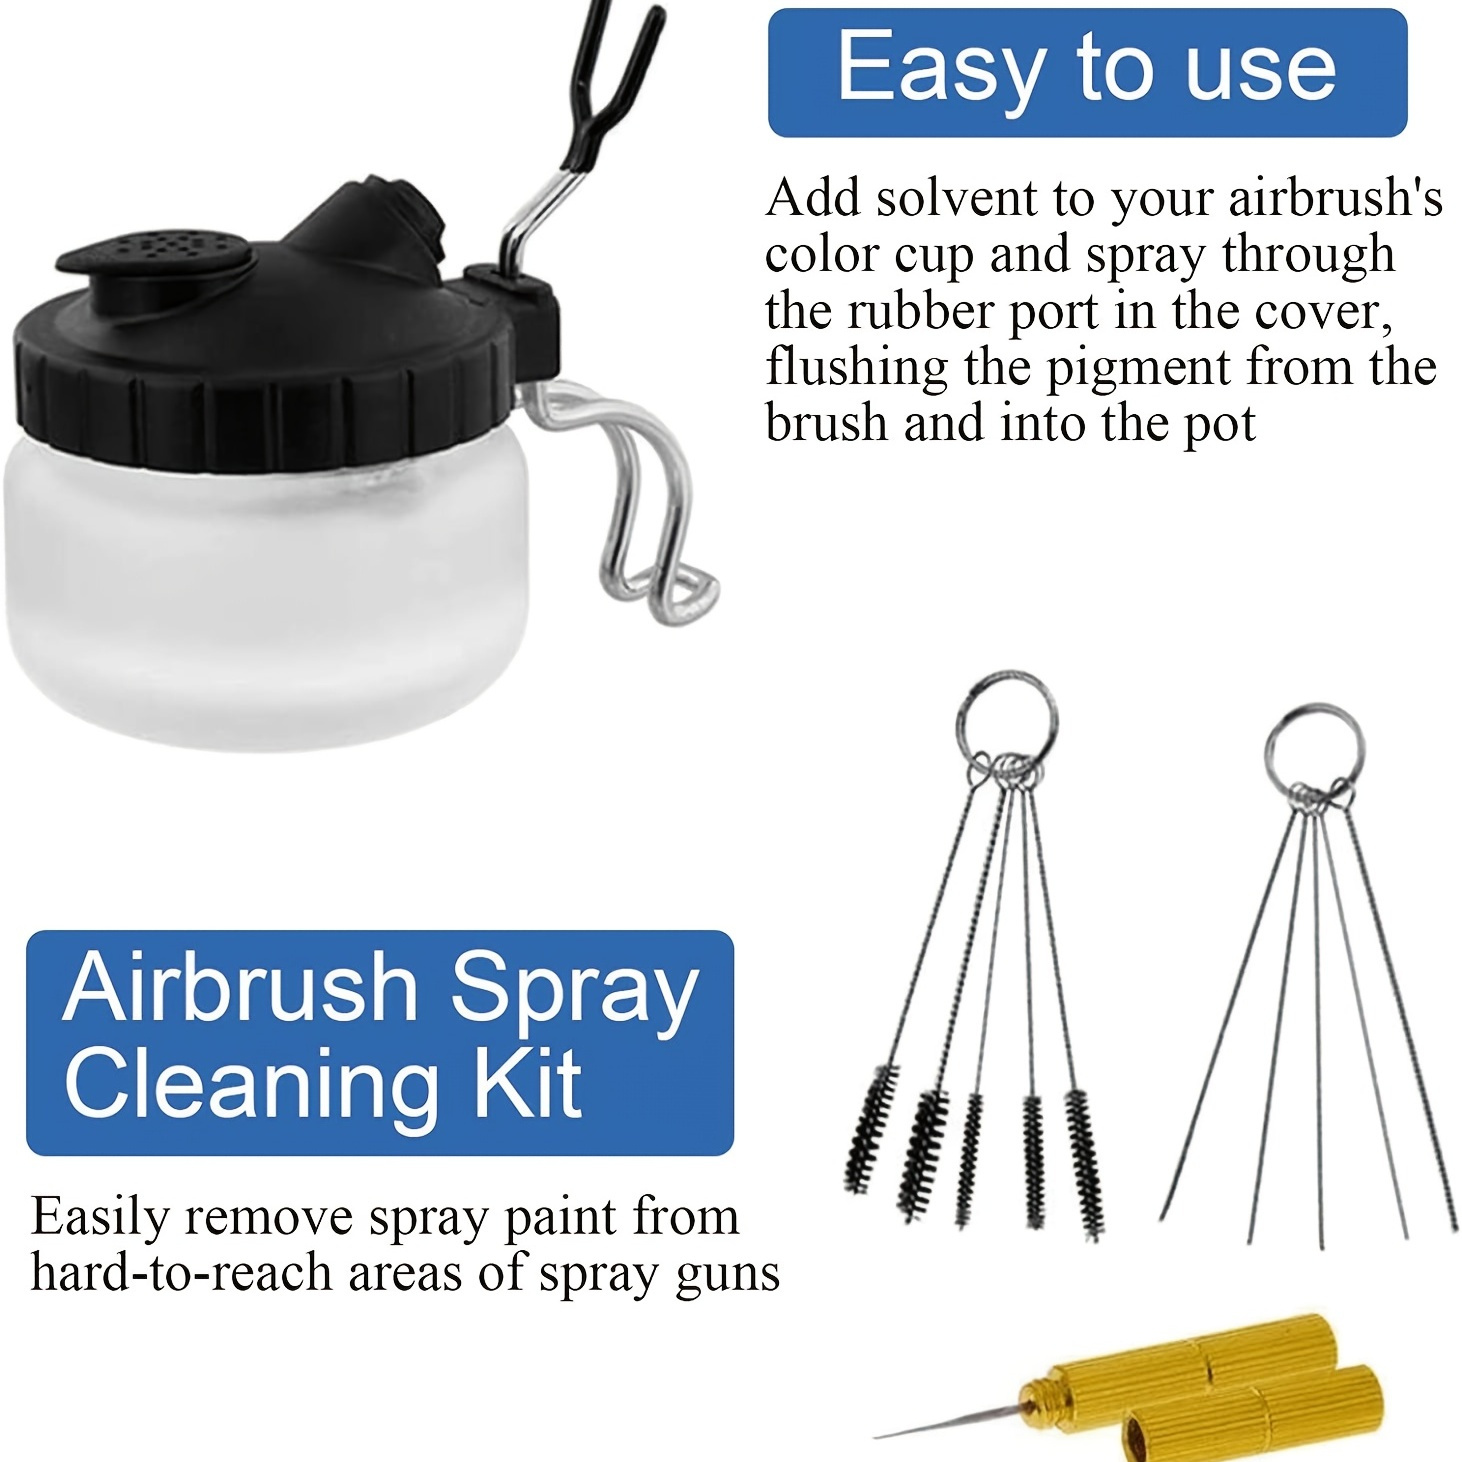 Airbrush Deluxe Airbrush 3 In 1 Cleaning Pot With Holder; Cleans Airbrush,  Holds Airbrush, Color Palette Lid, Filters,Cleaning Brush